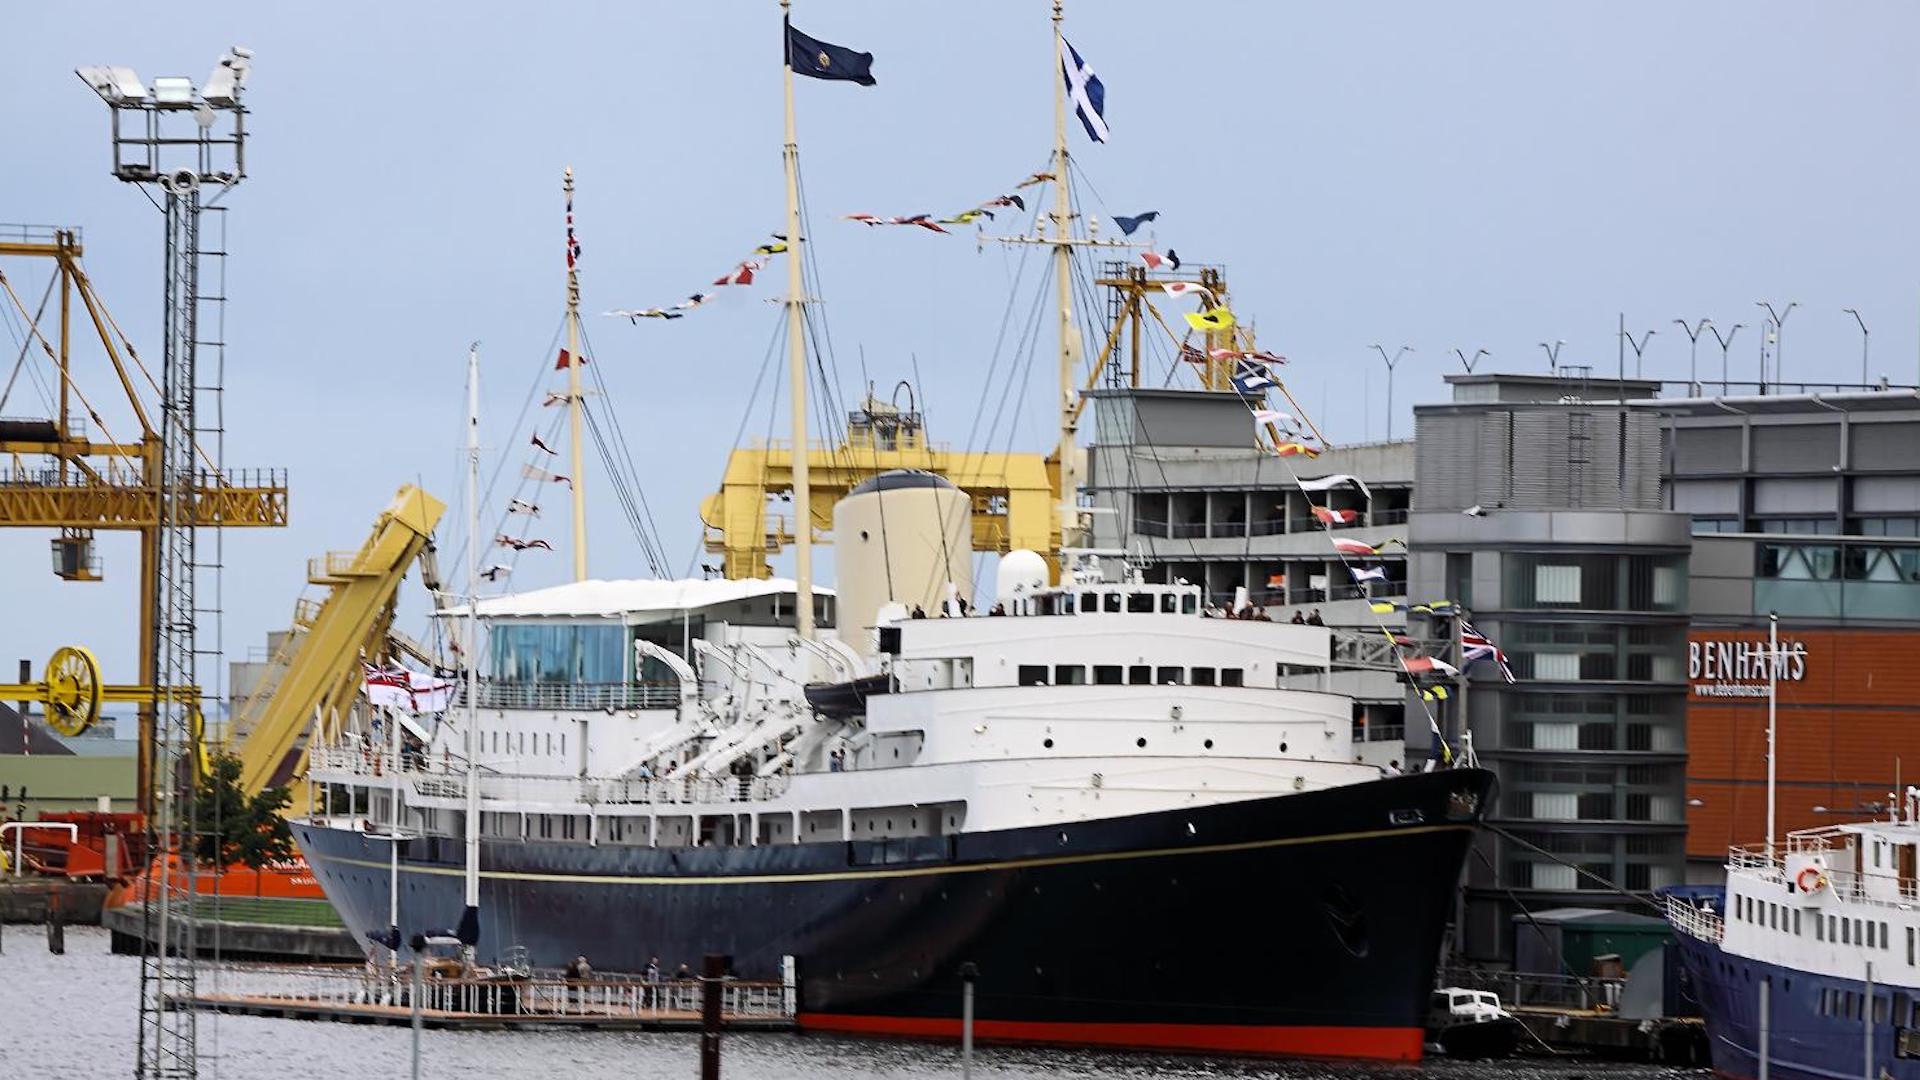 HMS Prince Philip would be successor to the Royal Yacht Britannia, decommissioned in 1997 to cut costs.